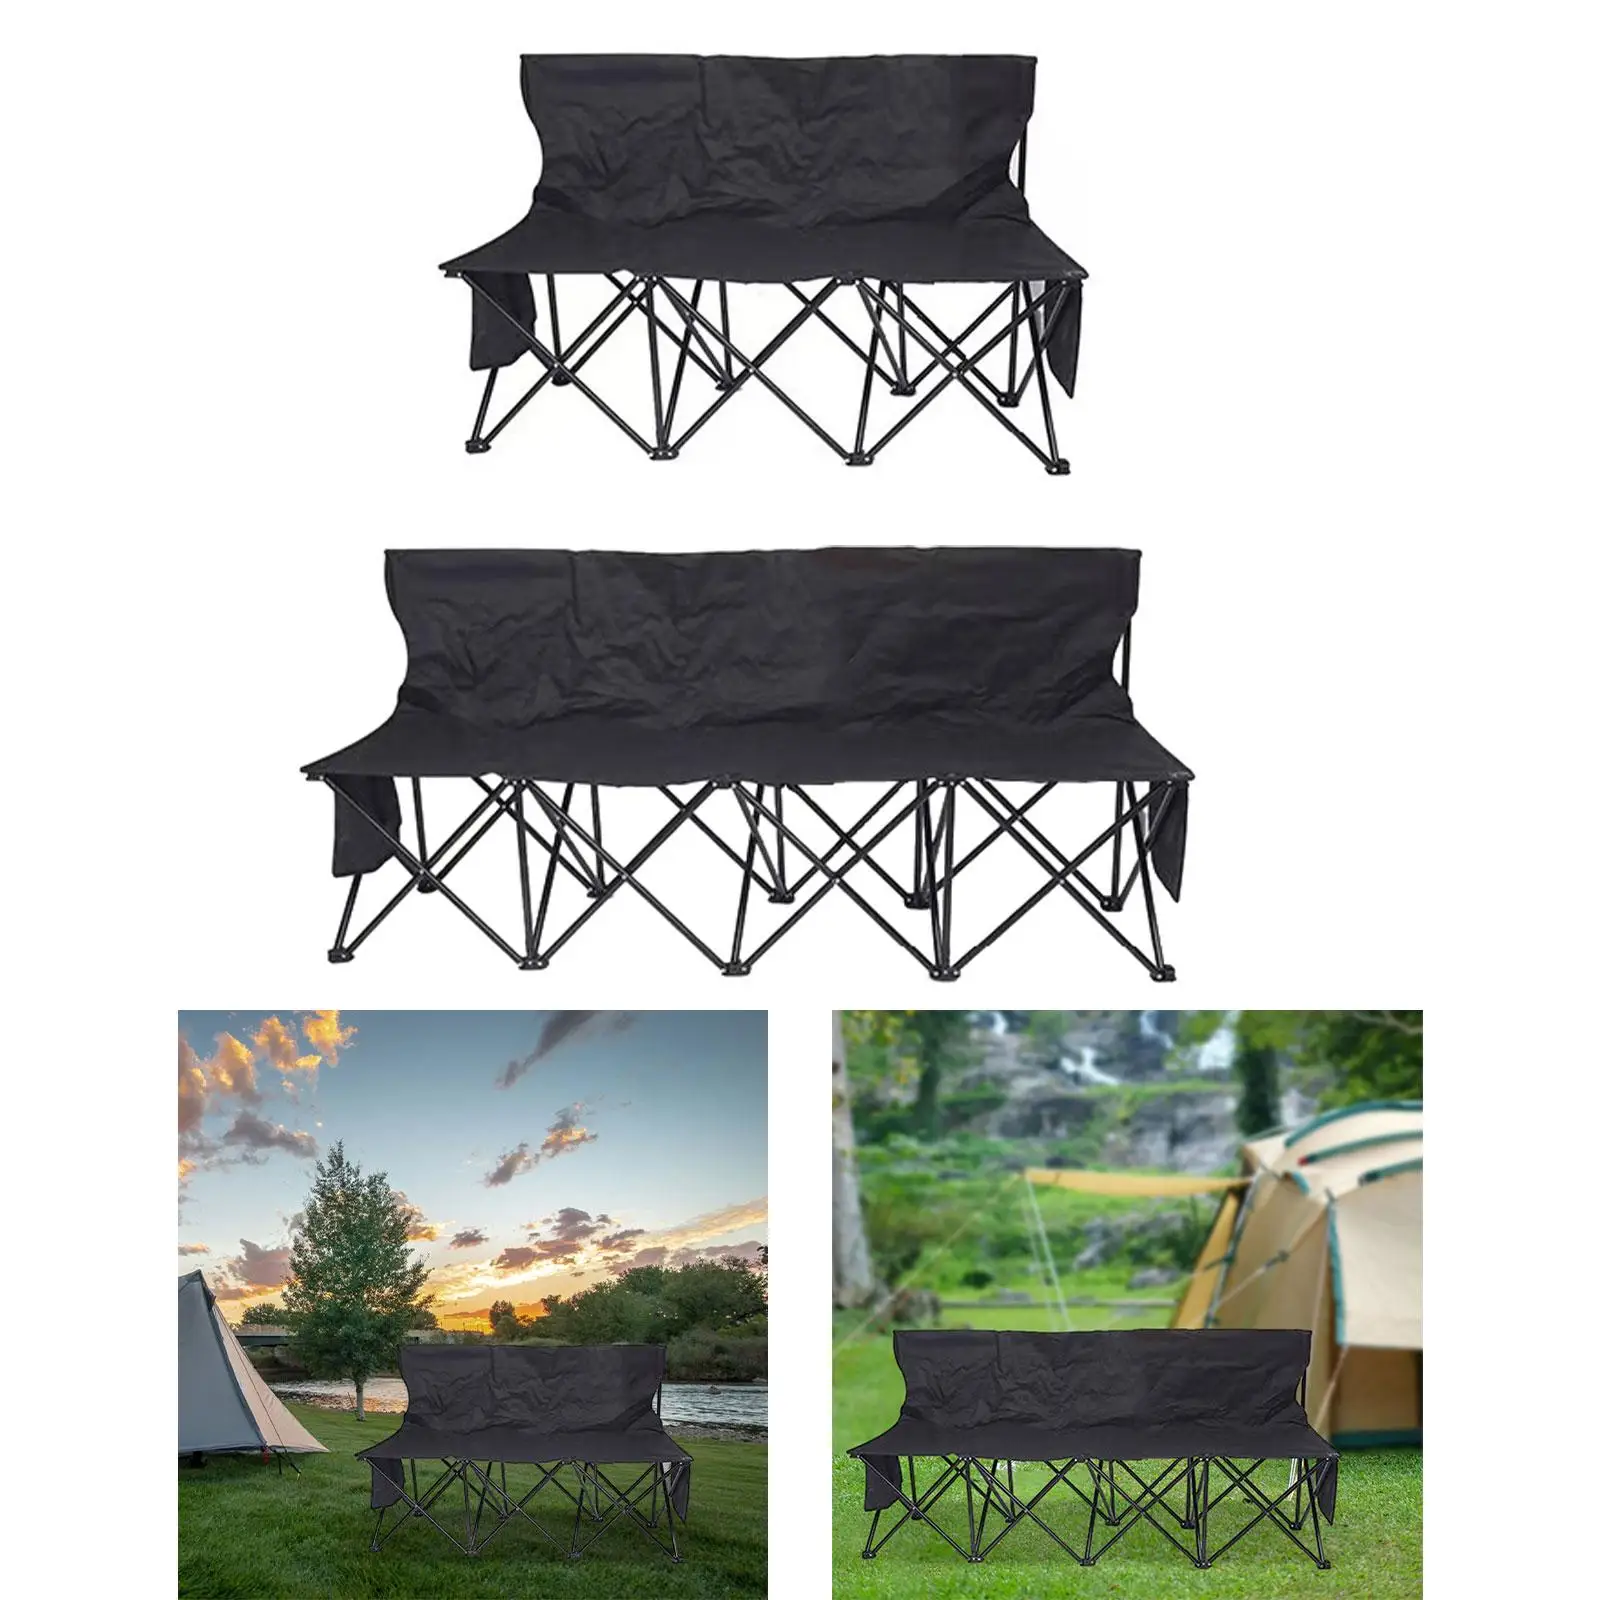 Folding Bench Chair with Back Support Oxford Cloth Steel Pipe Portable Sports Bench for Events Outdoor Soccer Games Lawn Beach